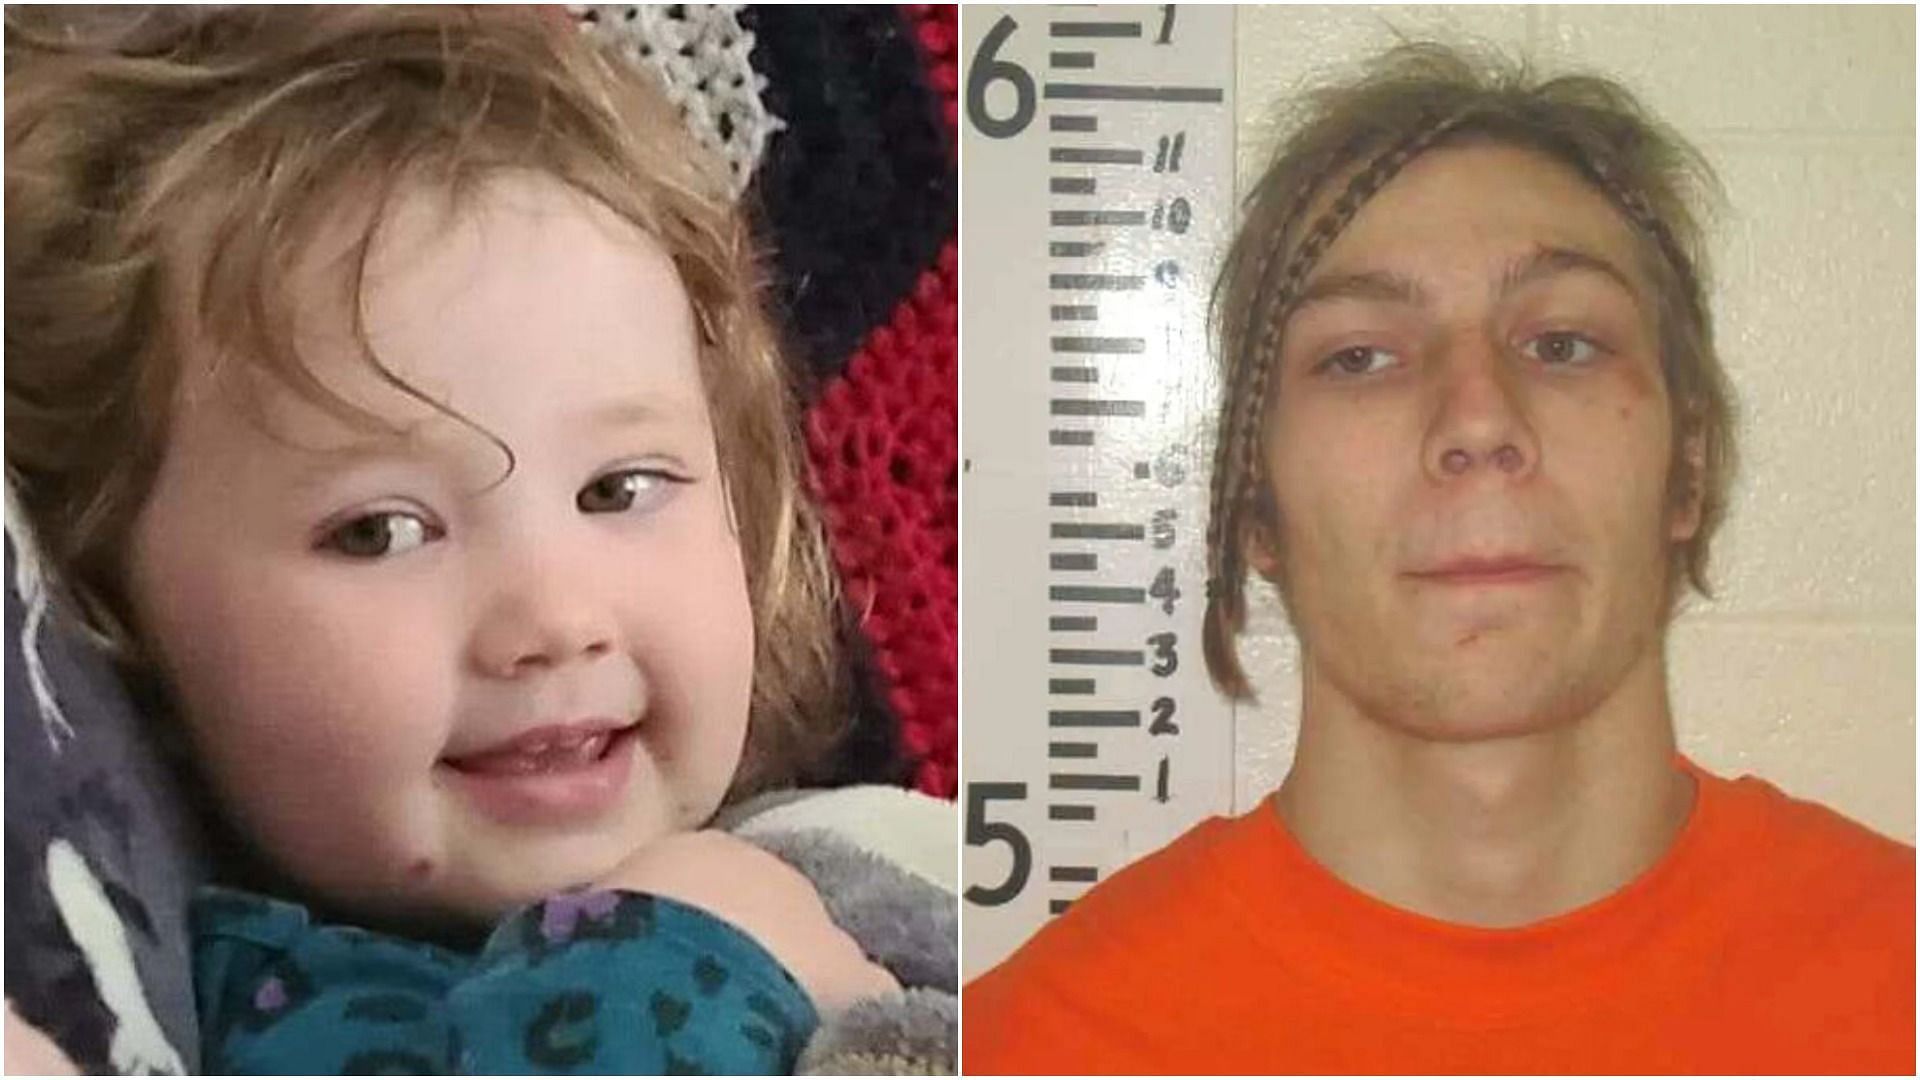 Octavia Huber Young and Andrew Huber Young (Image via Twitter and York County Jail)